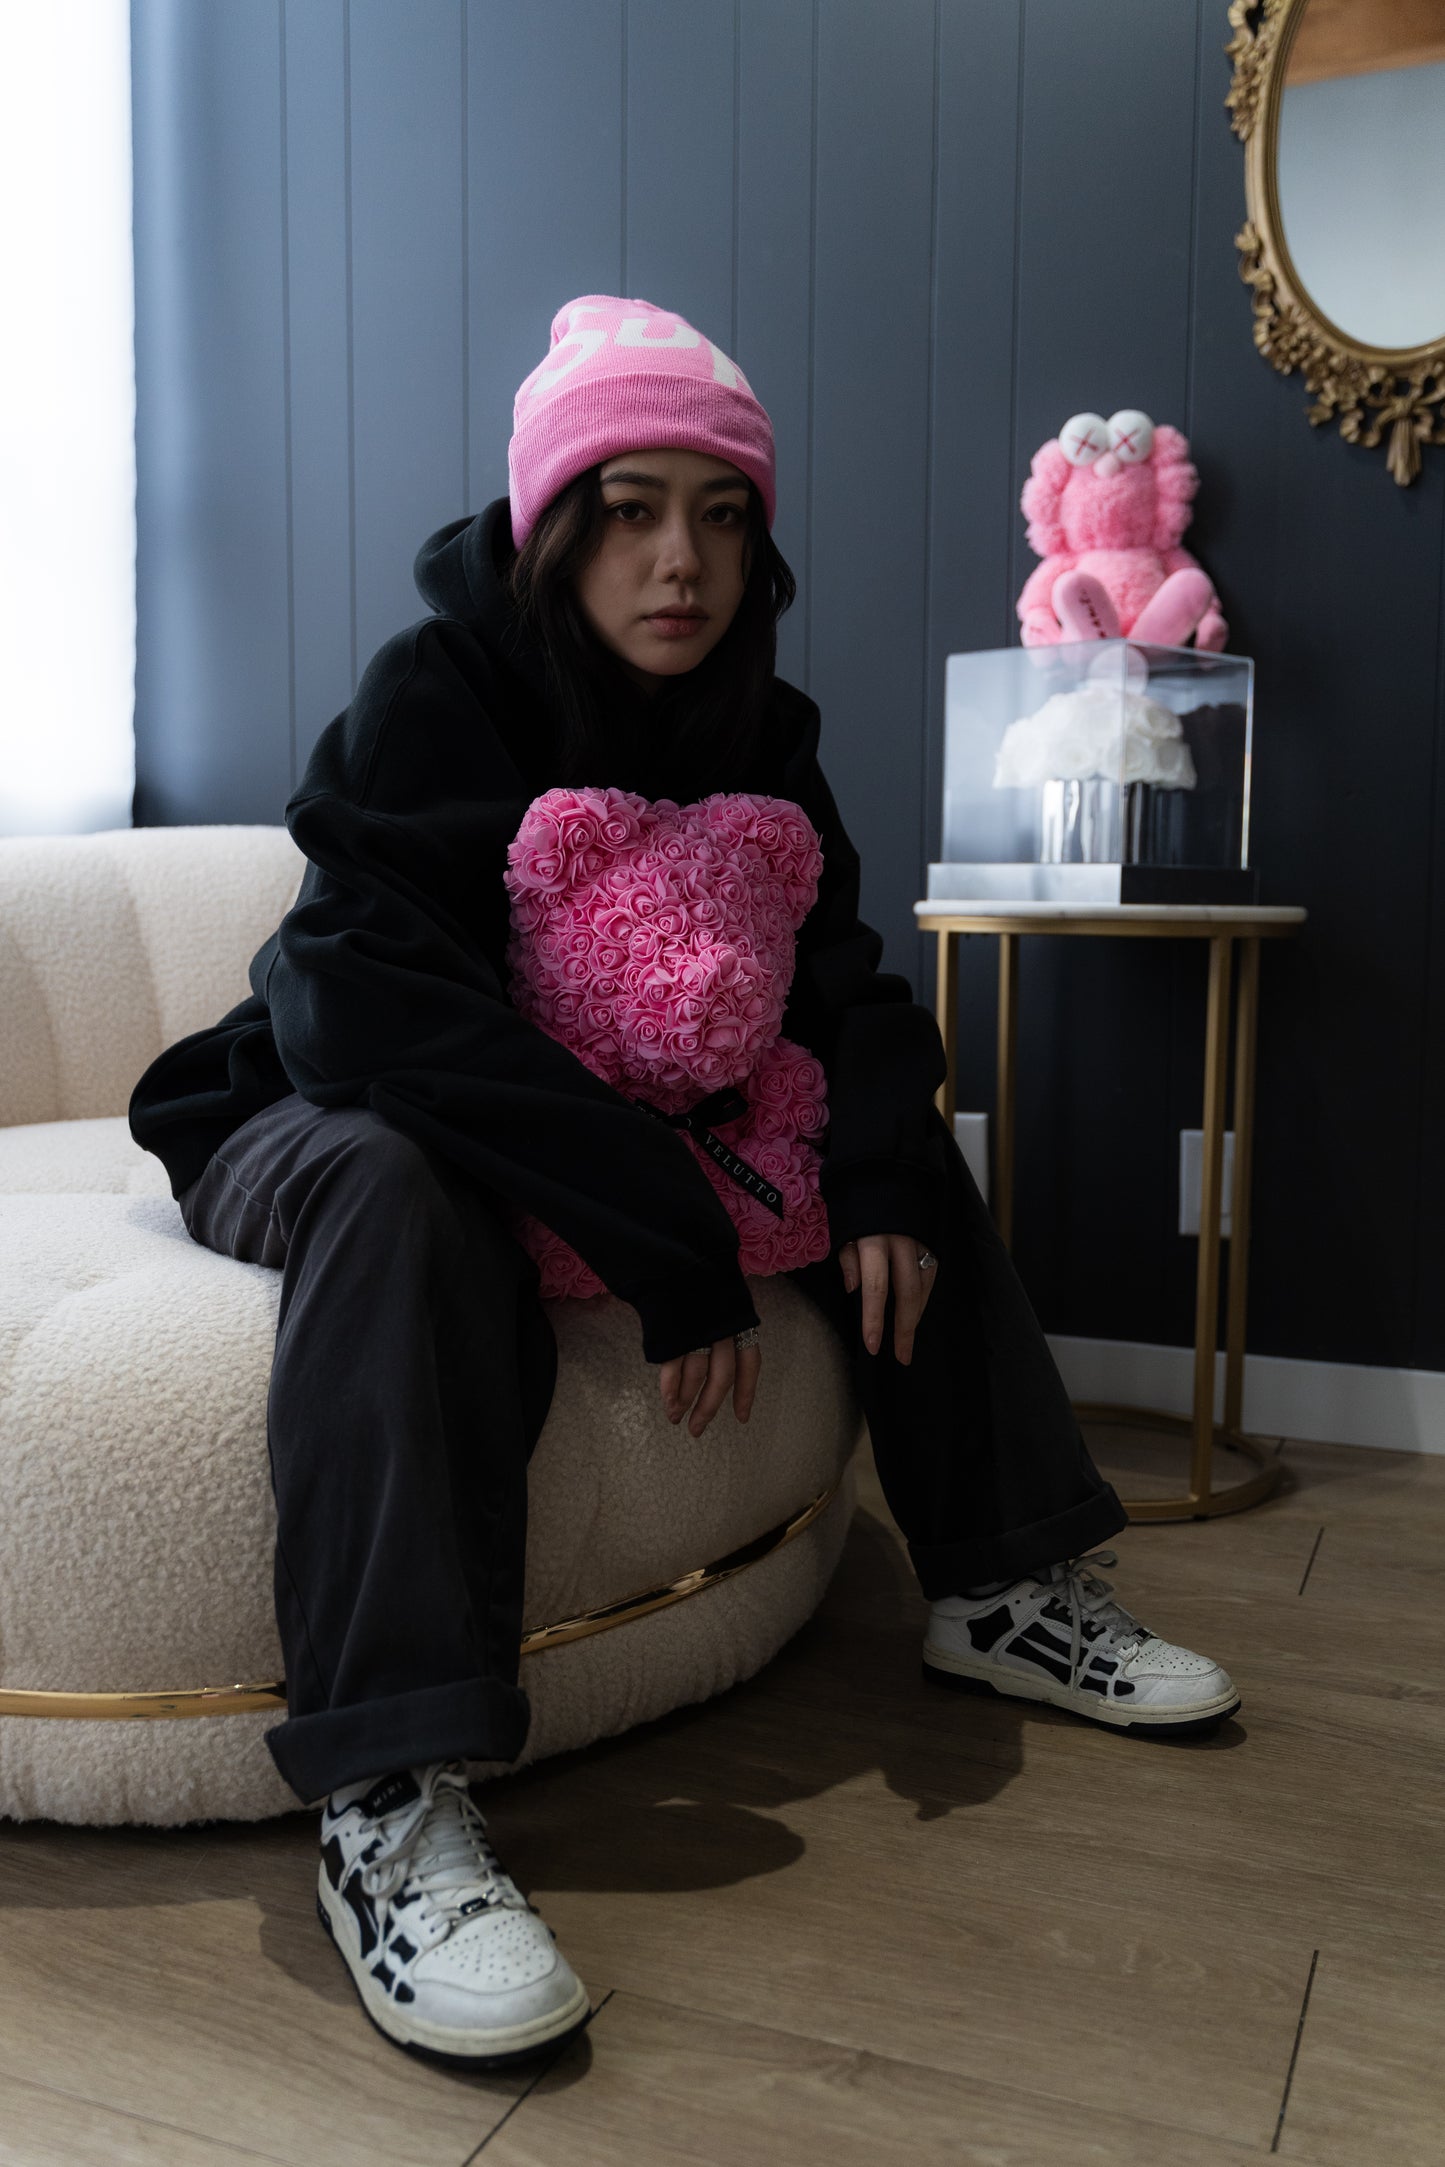 [Velutto Rose Bear] Pink + infused w/ Jo Malone's oil diffuser